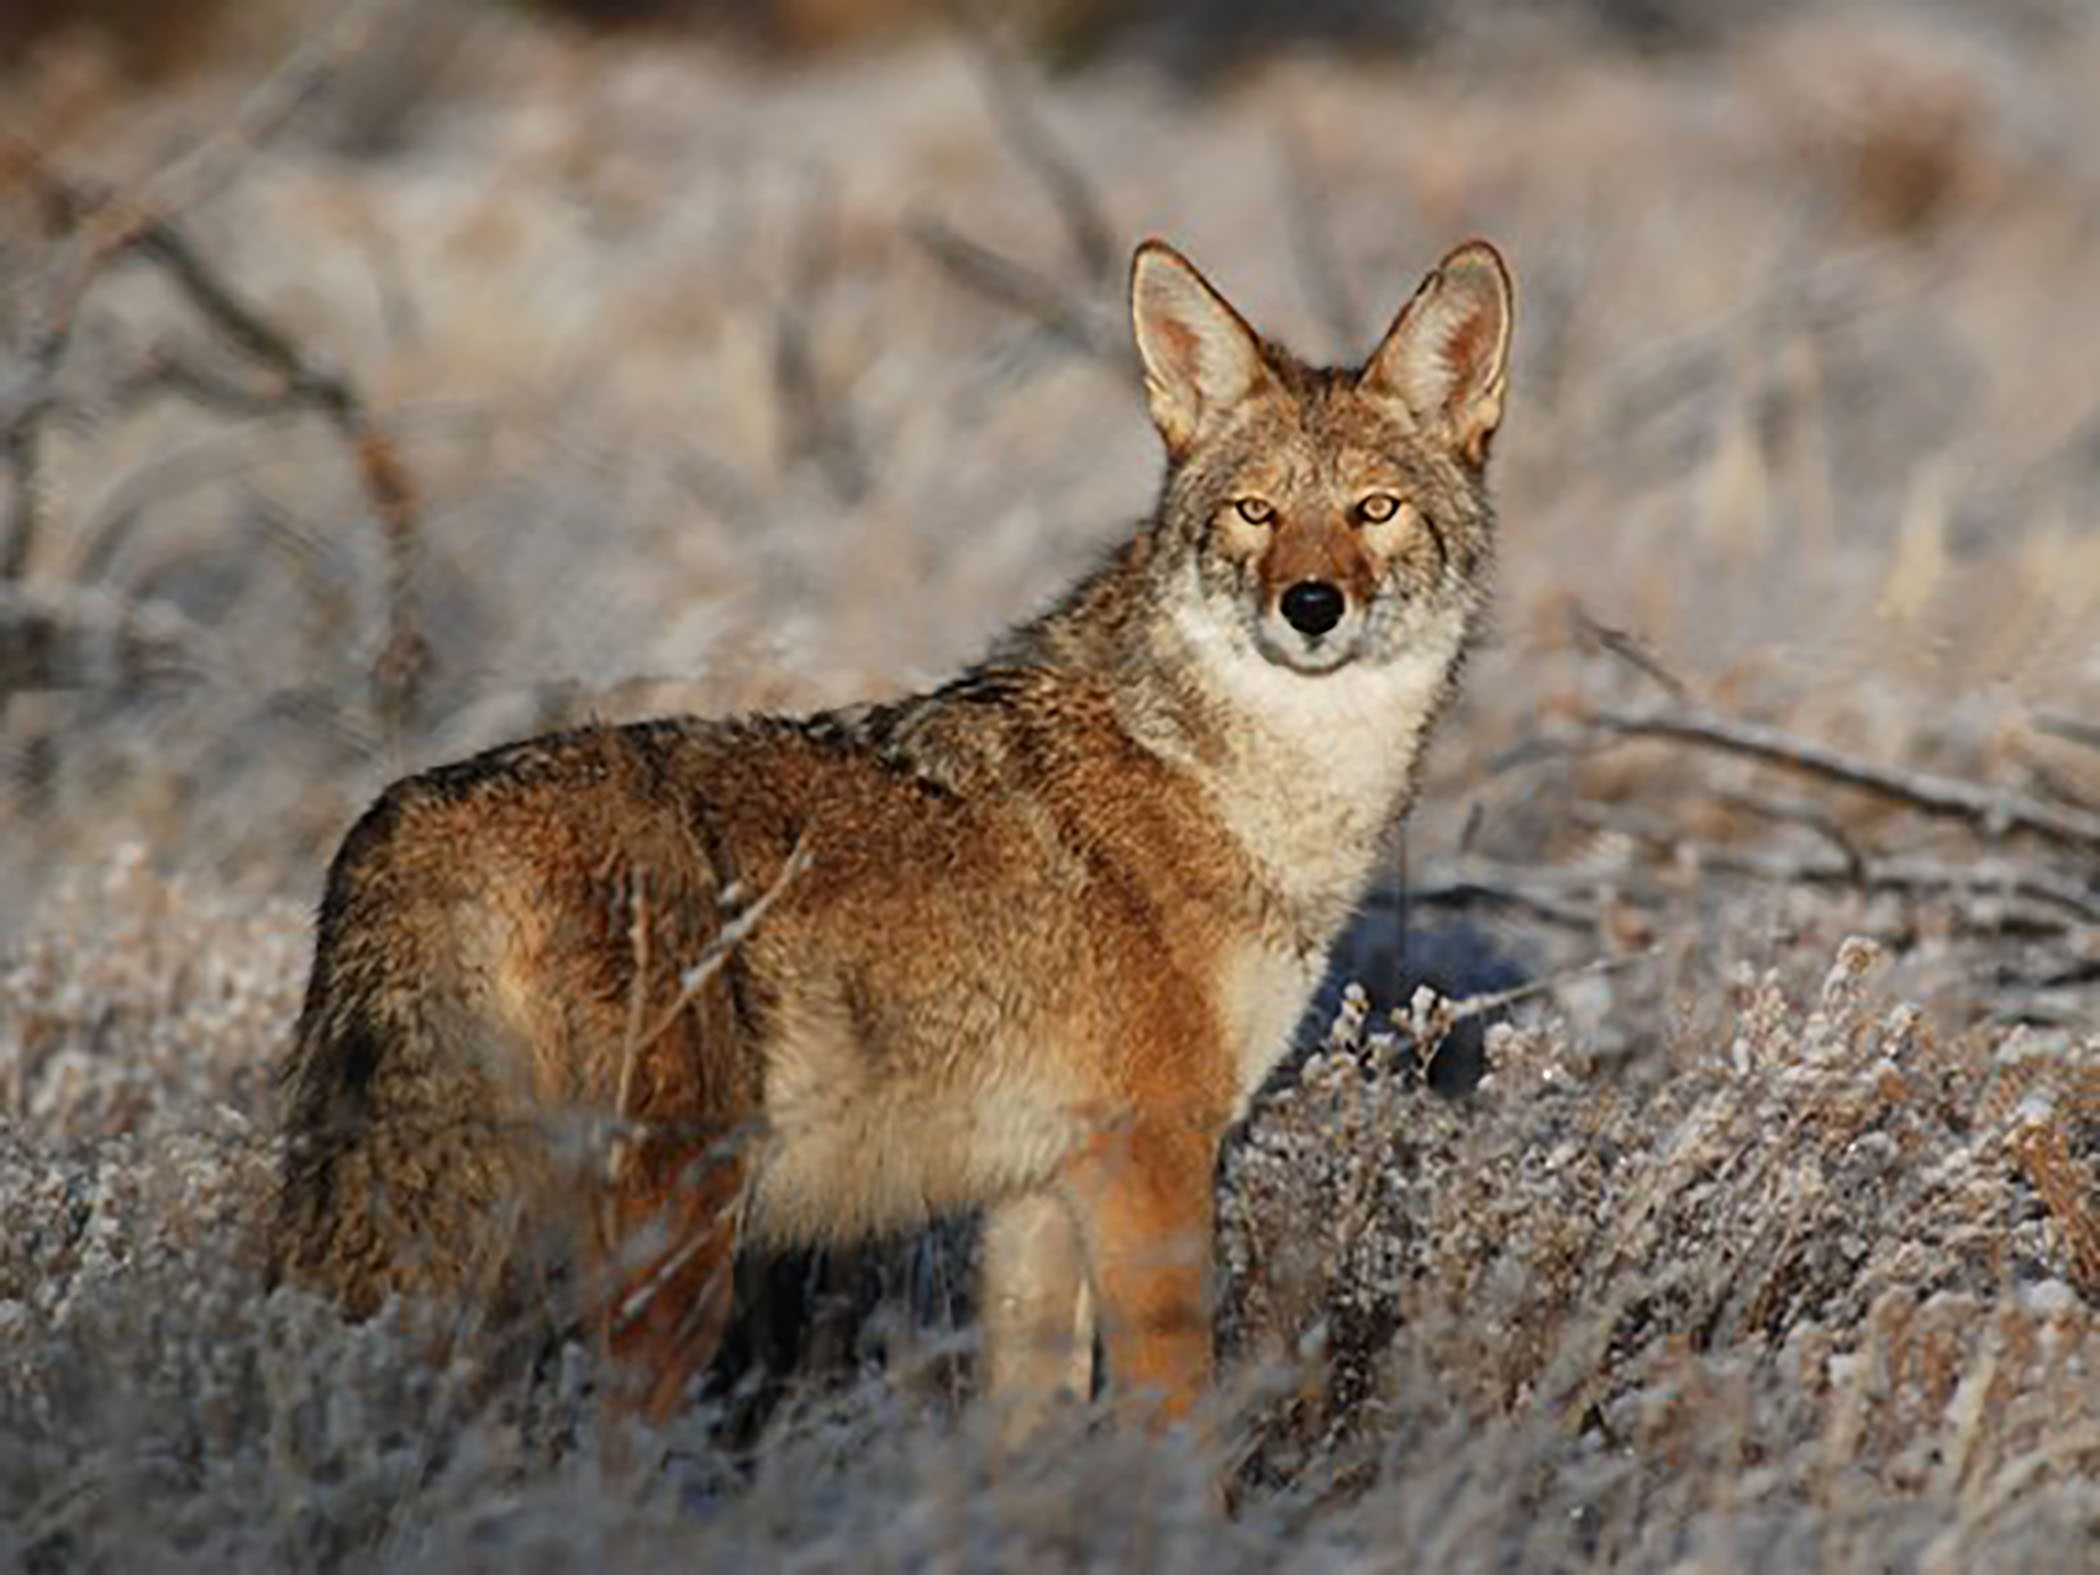 Pa Laws on Coyote Hunting